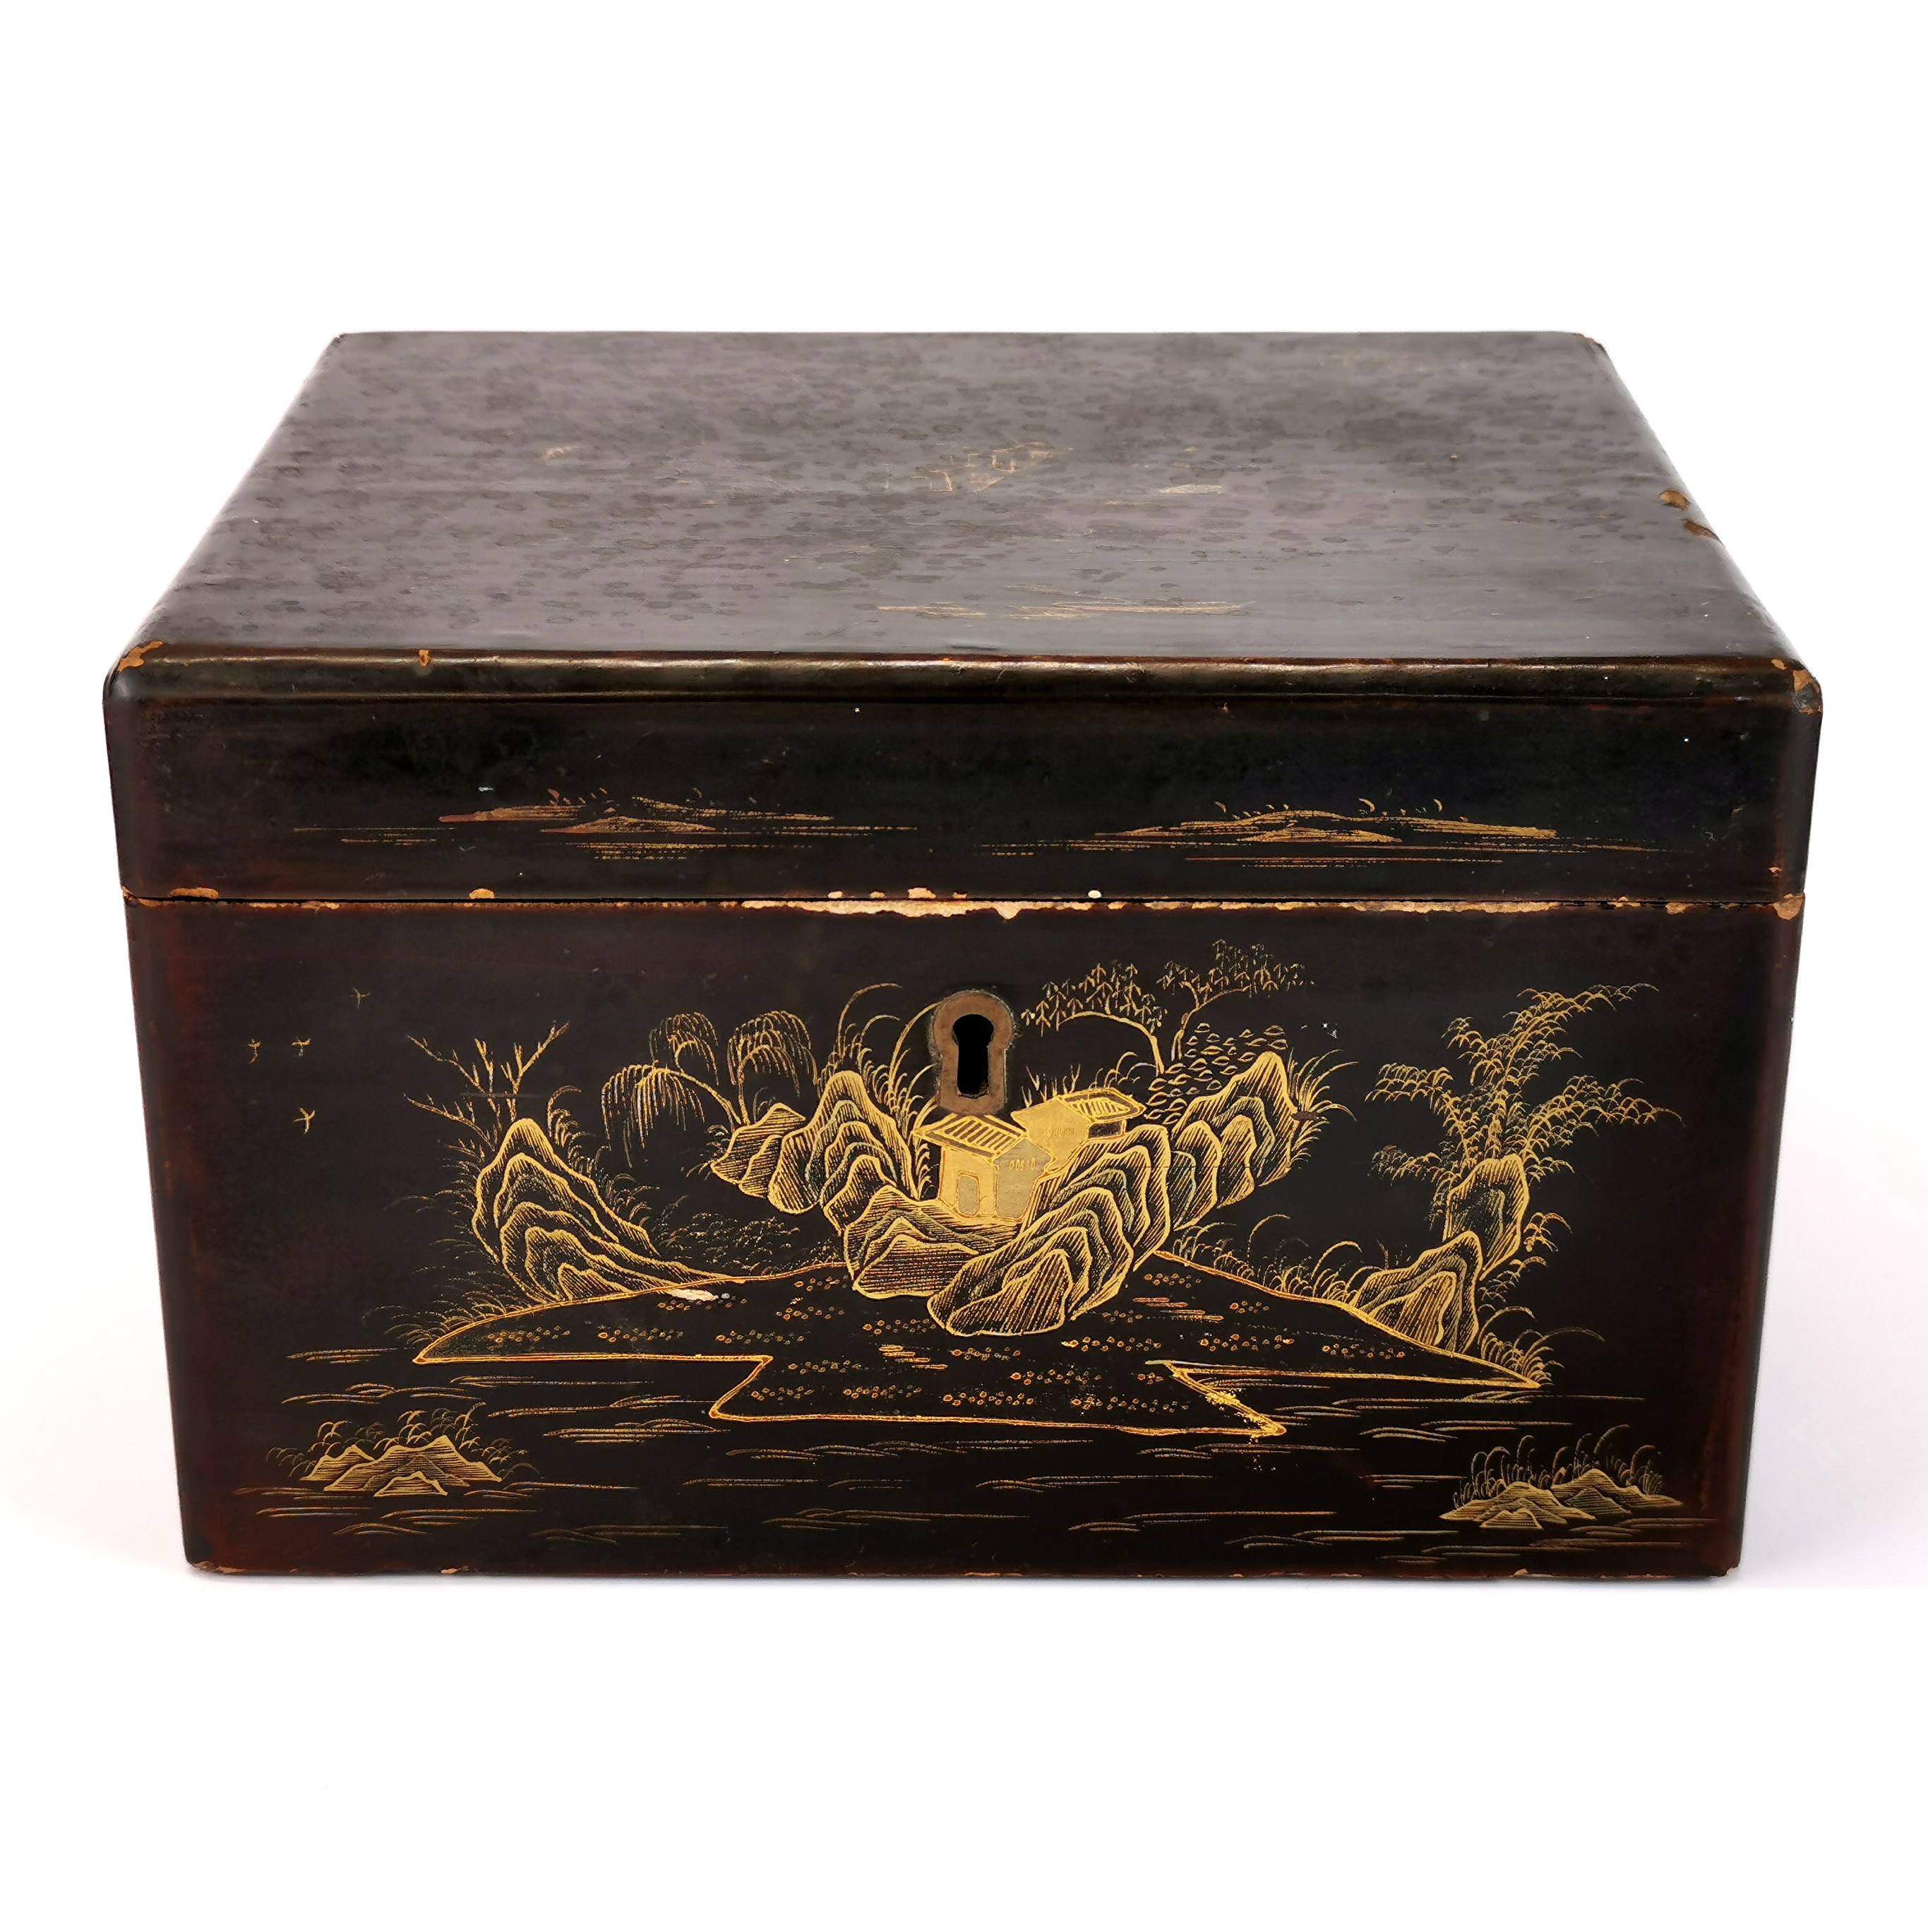 A 19th century Chinese lacquered wood and pewter tea box, 21 x 17 x 13cm.